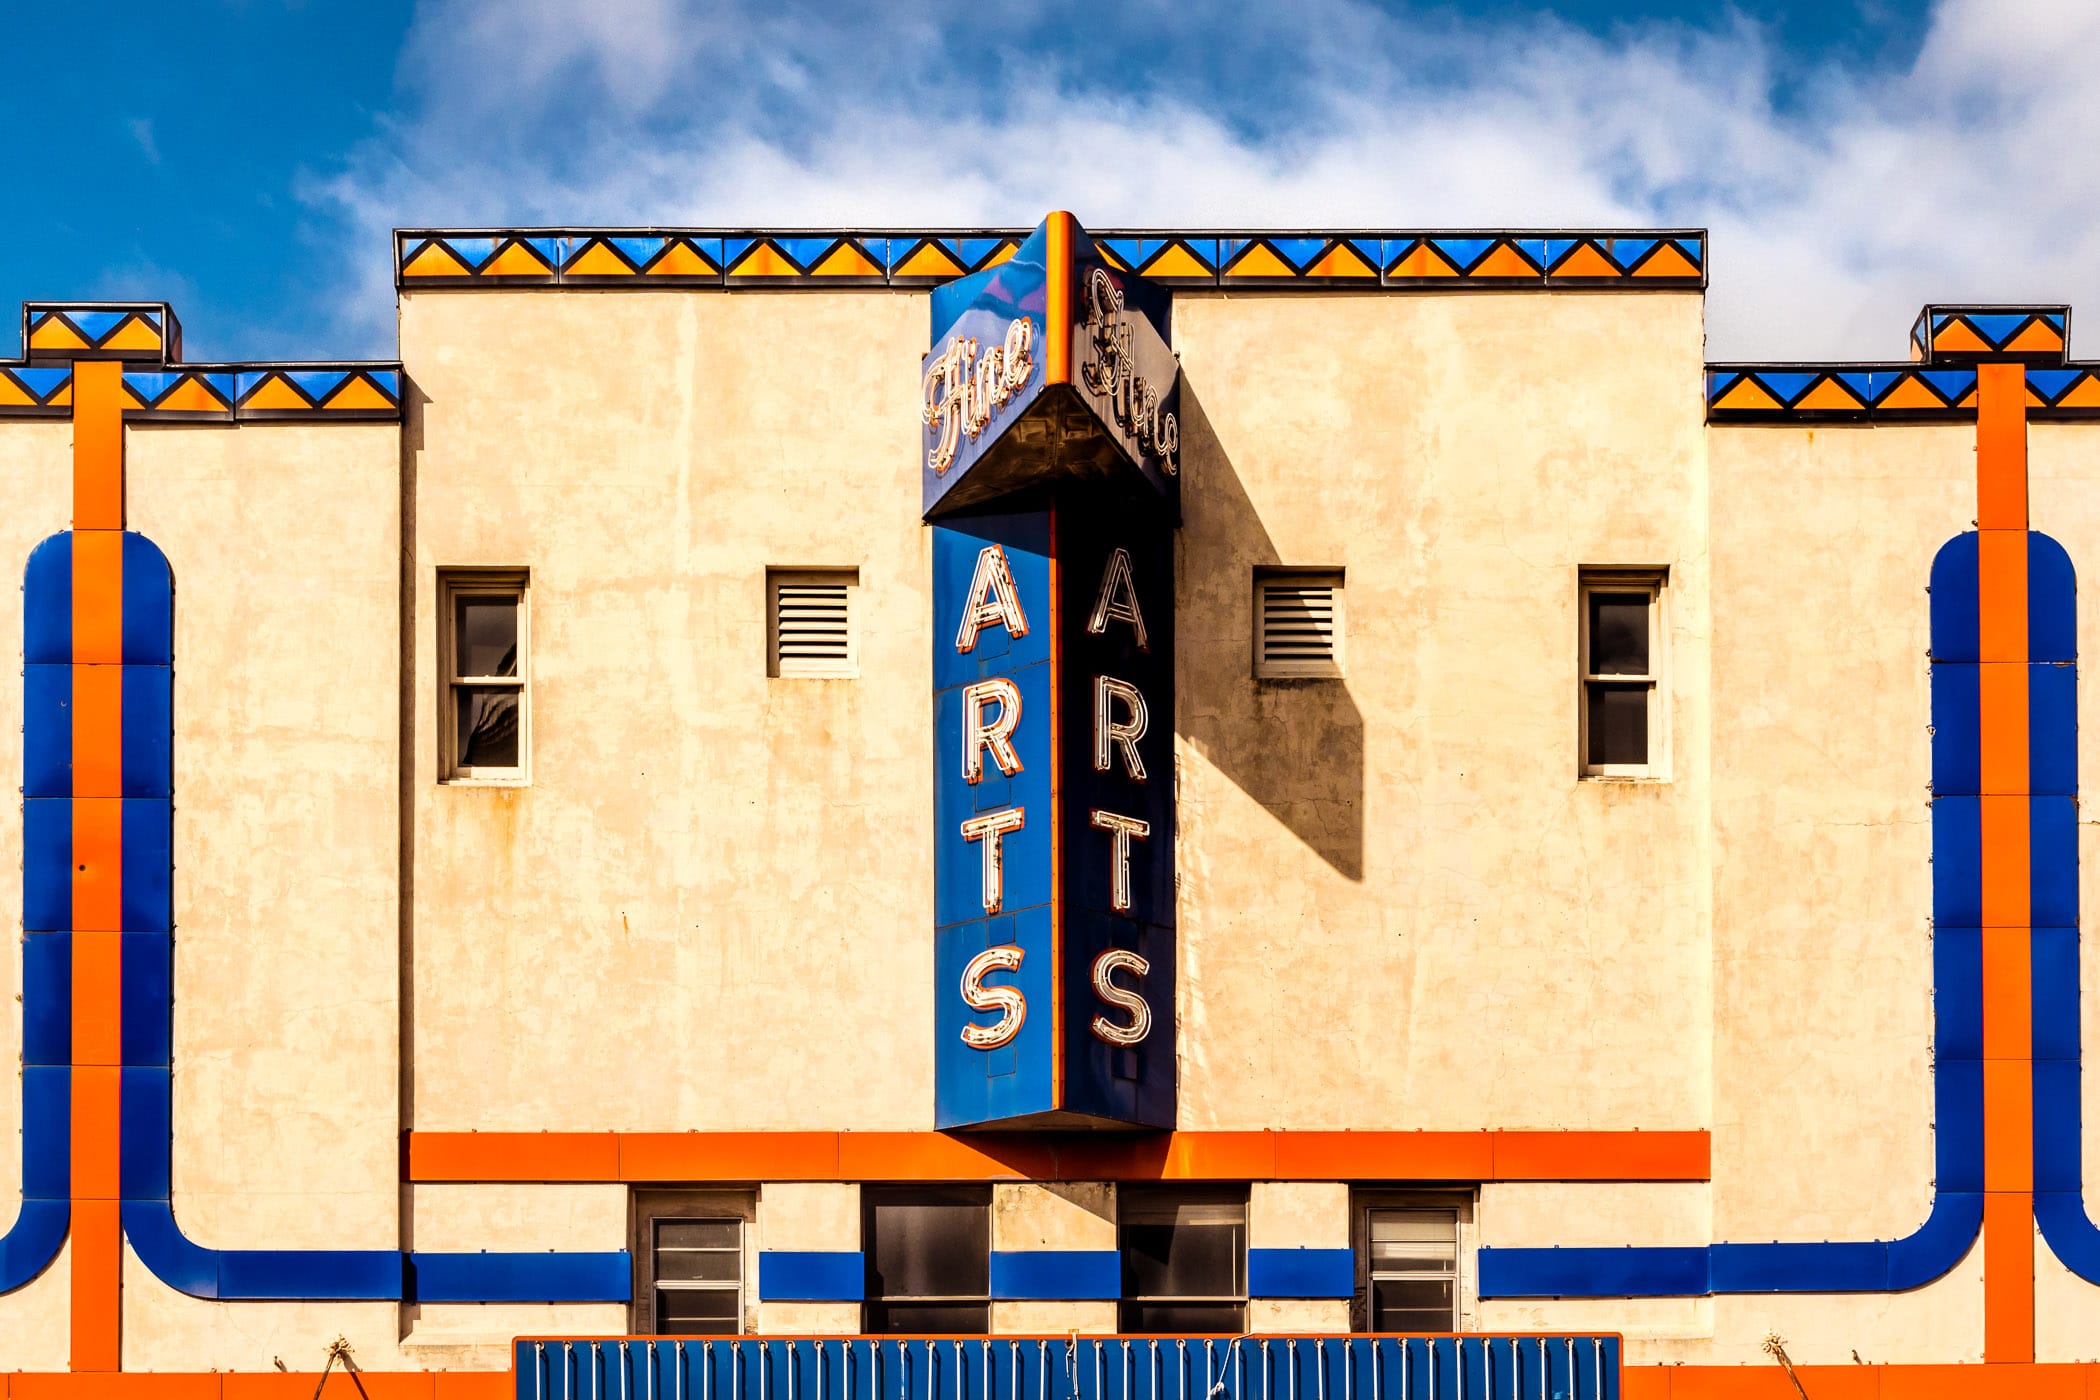 The sign and facade of the Fine Arts Theatre in Downtown Denton, Texas.